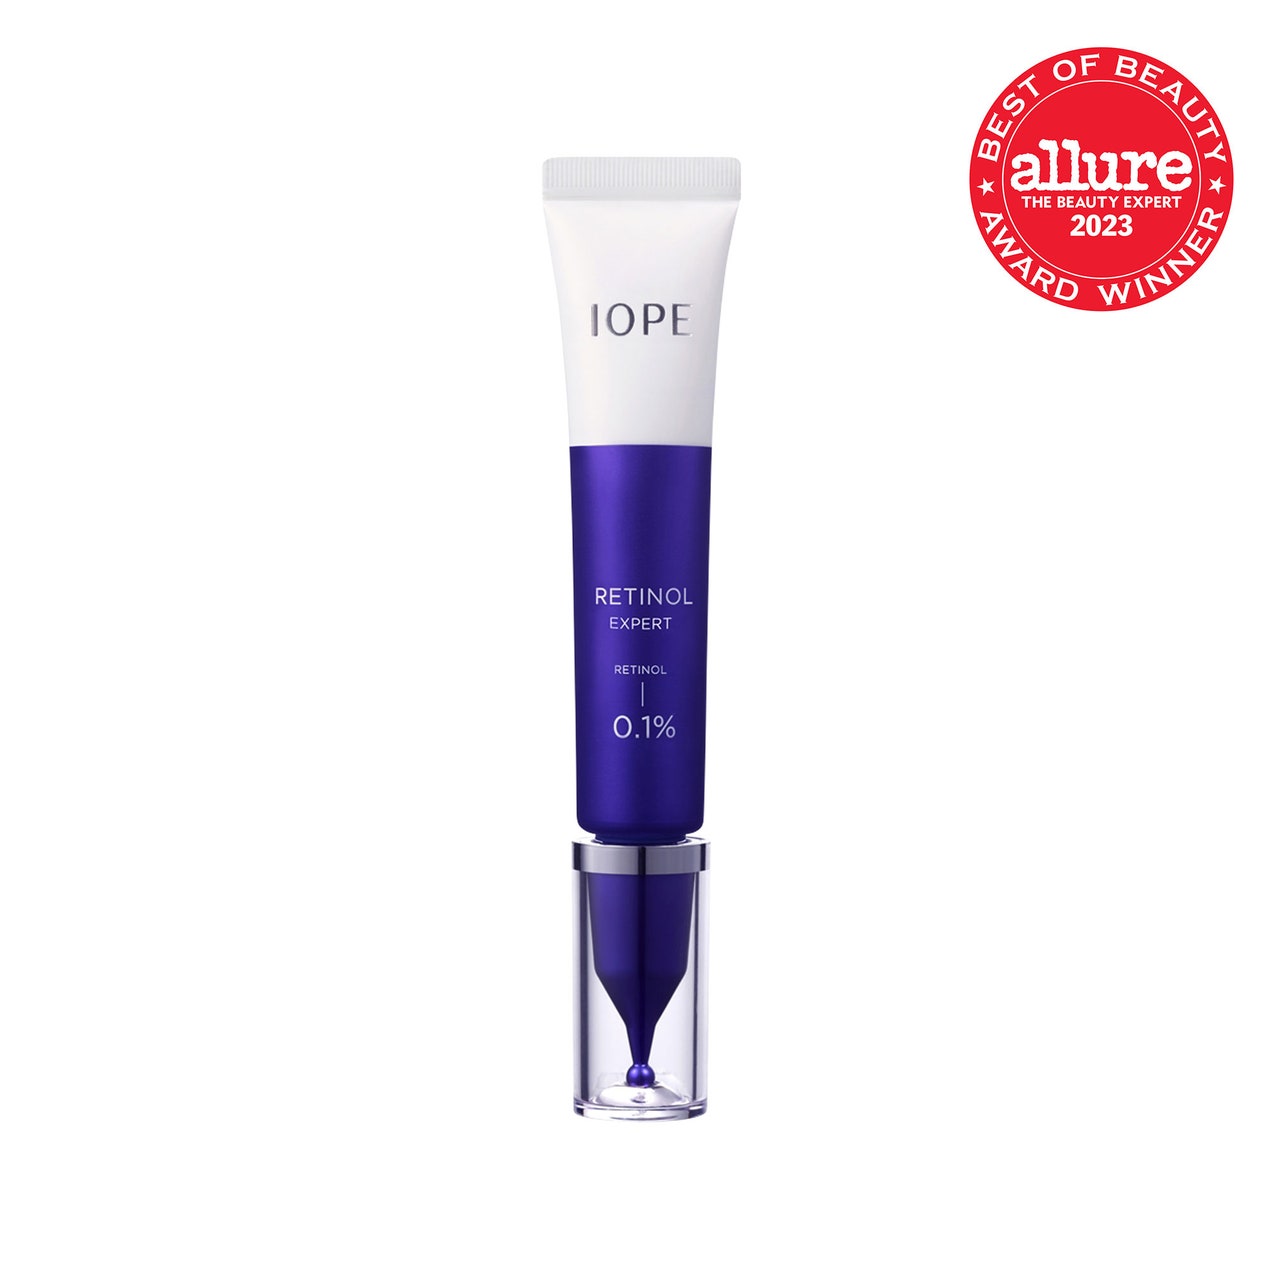 IOPE Retinol Expert 0.1% purple and white tube on white background with red Allure BoB seal in the top right corner